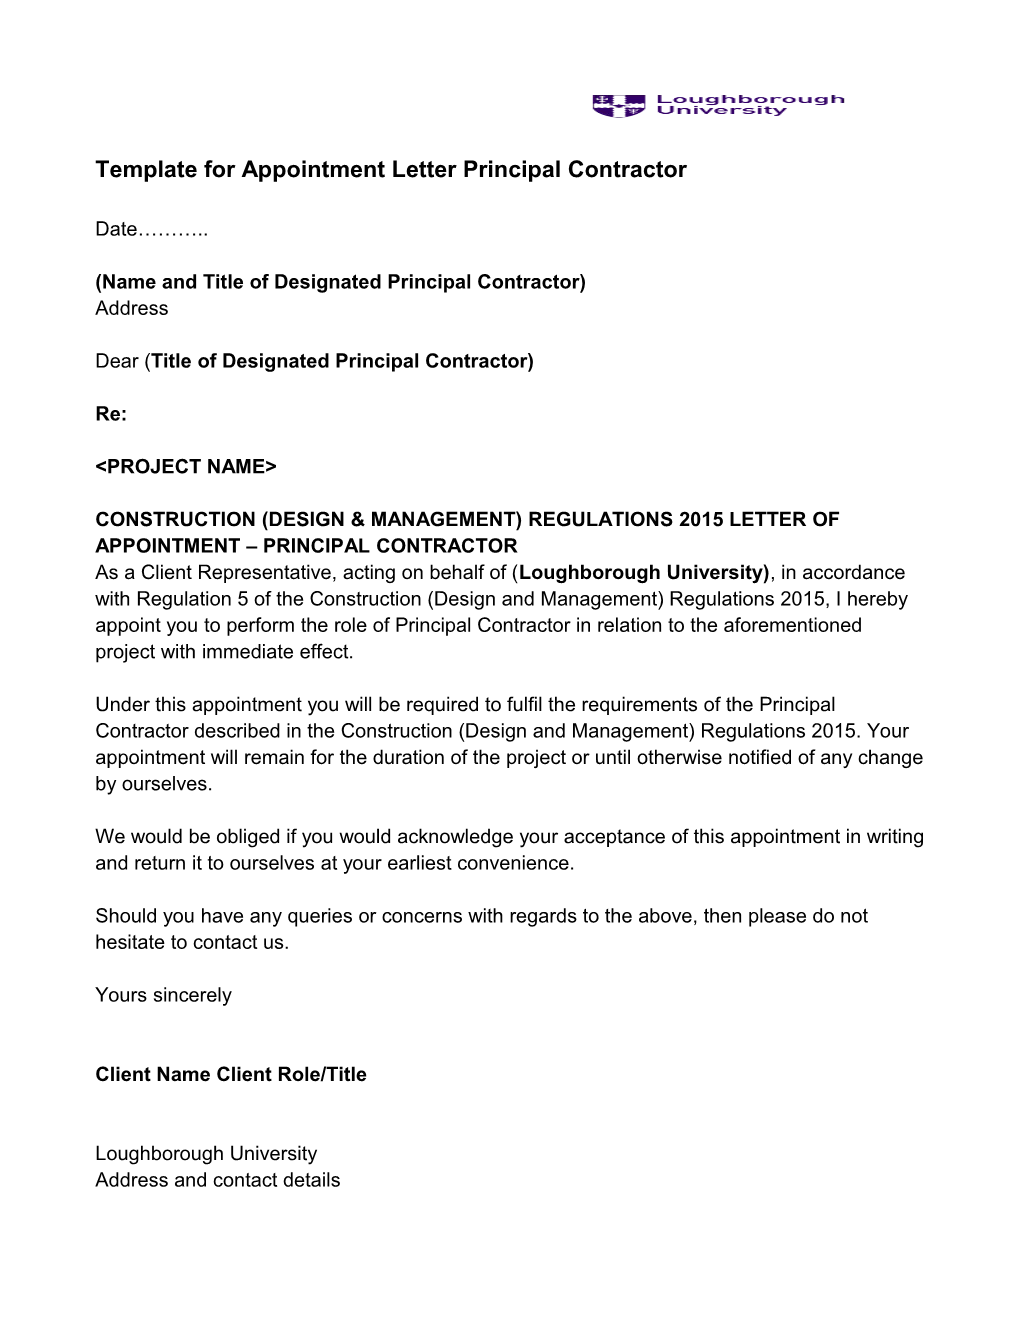 Template for Appointment Letter Principal Contractor